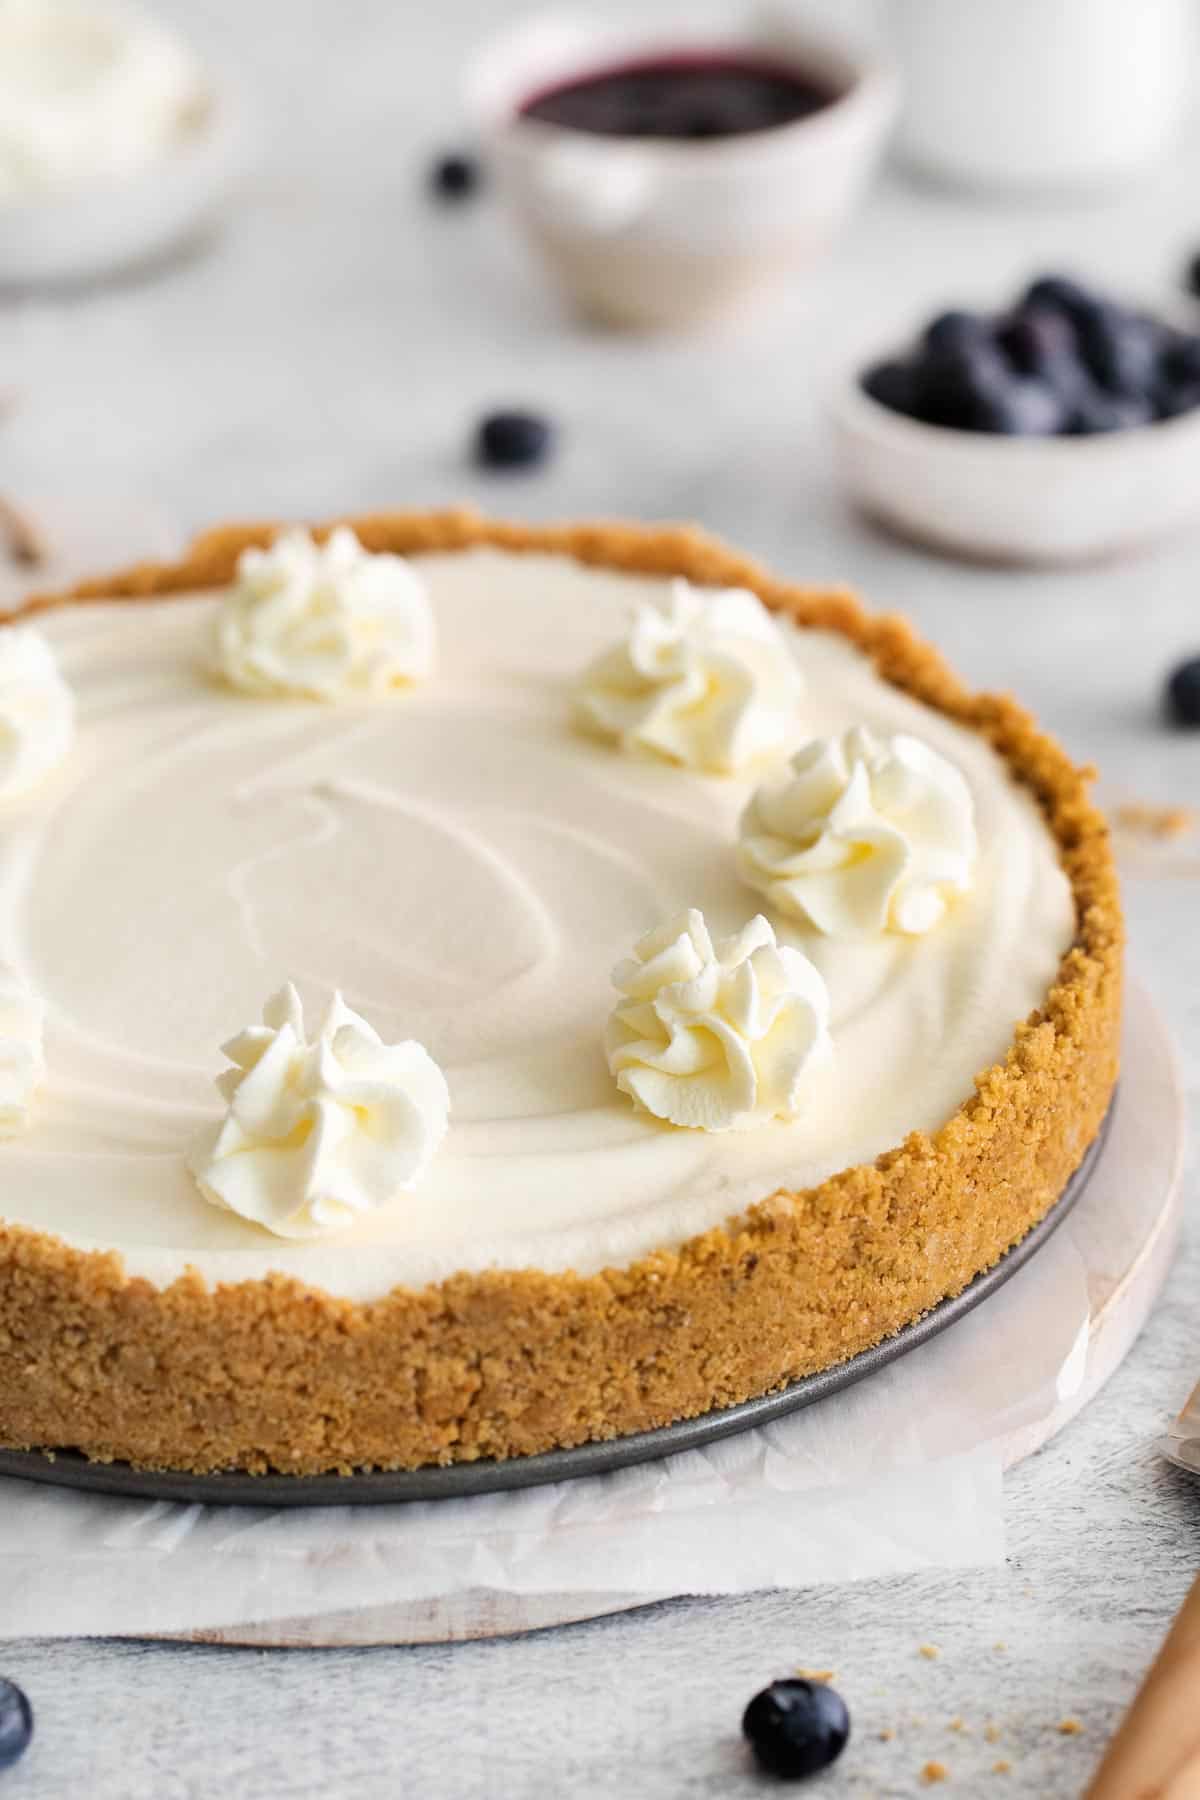 A whole gluten-free no-bake cheesecake on a serving dish